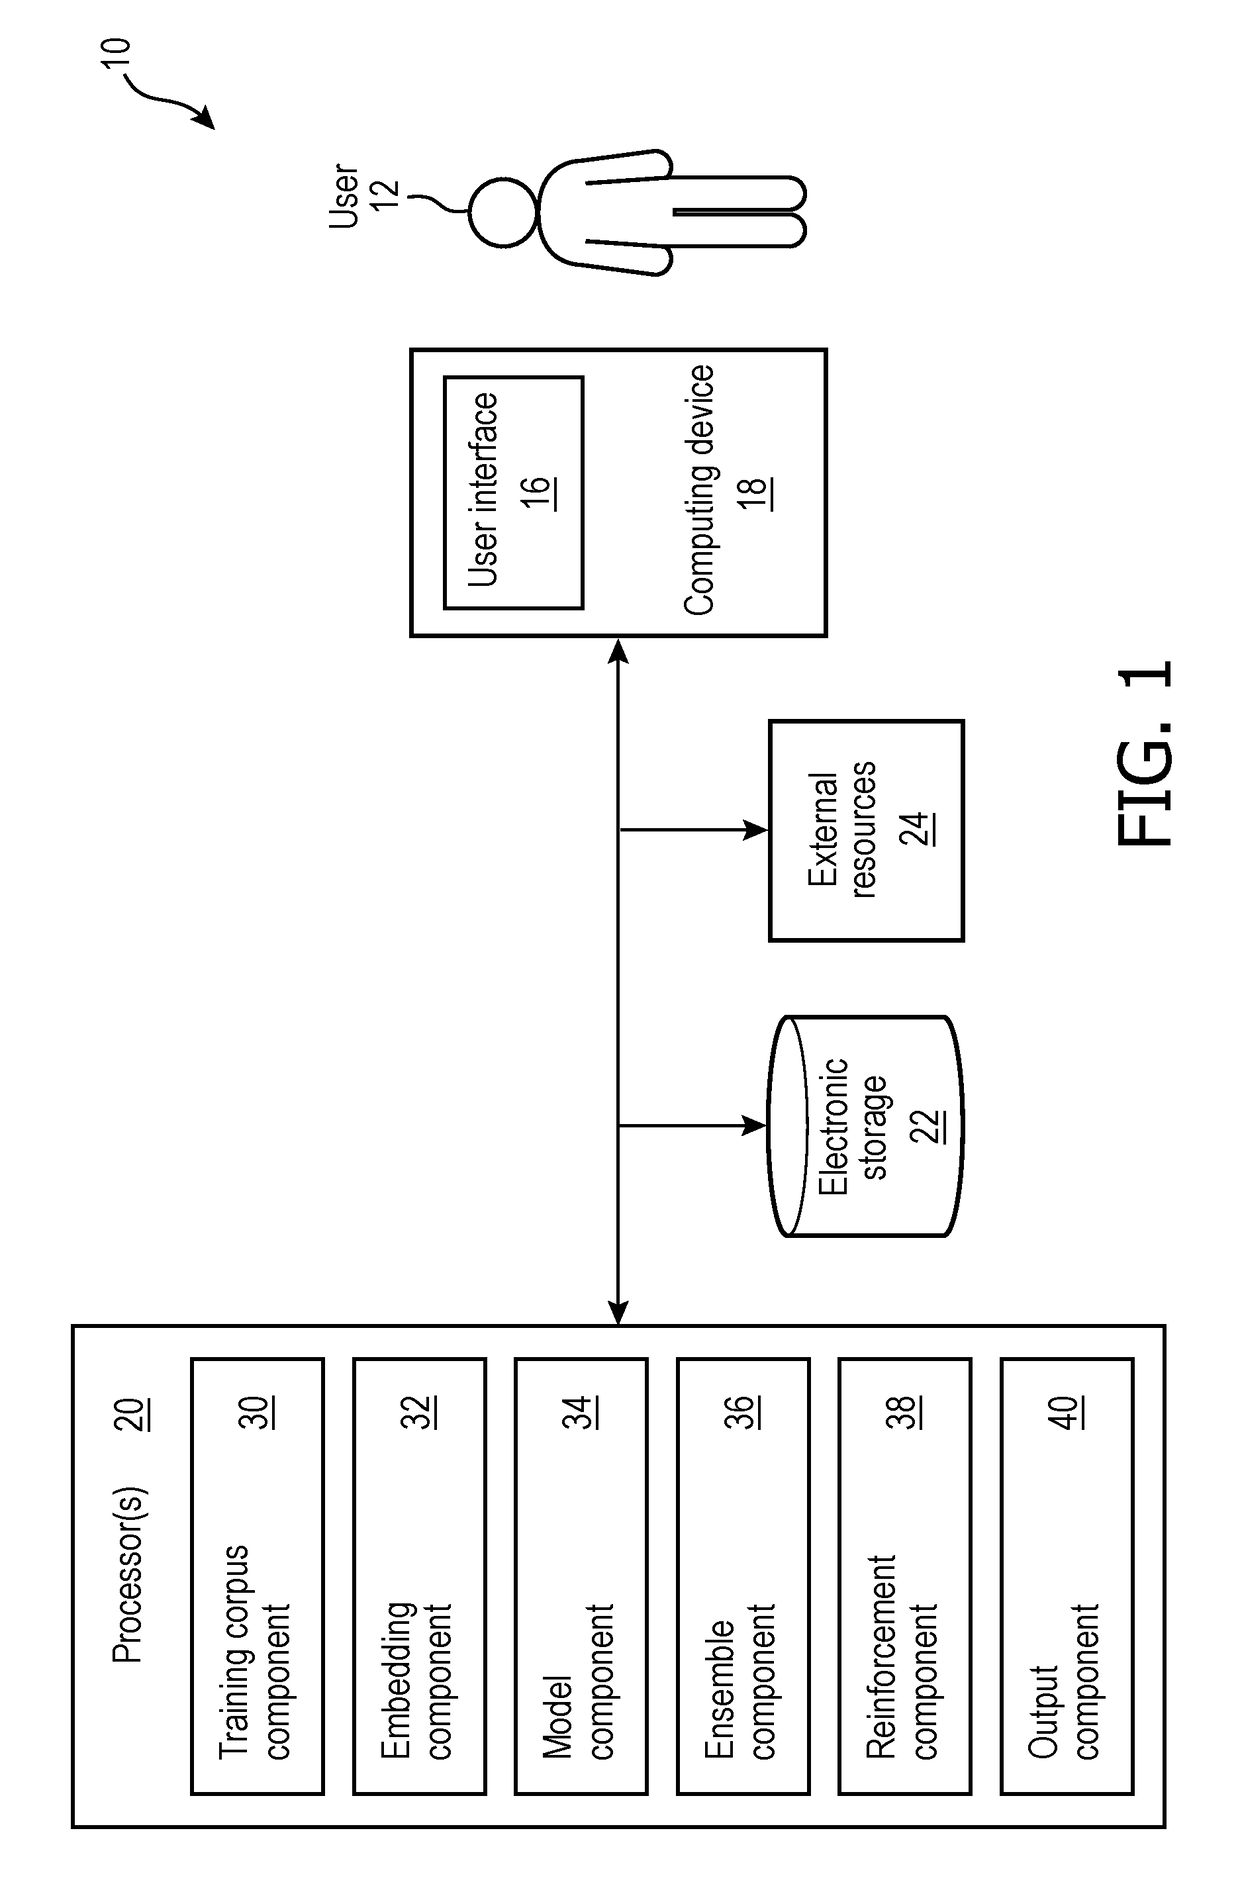 Systems and methods for neural clinical paraphrase generation